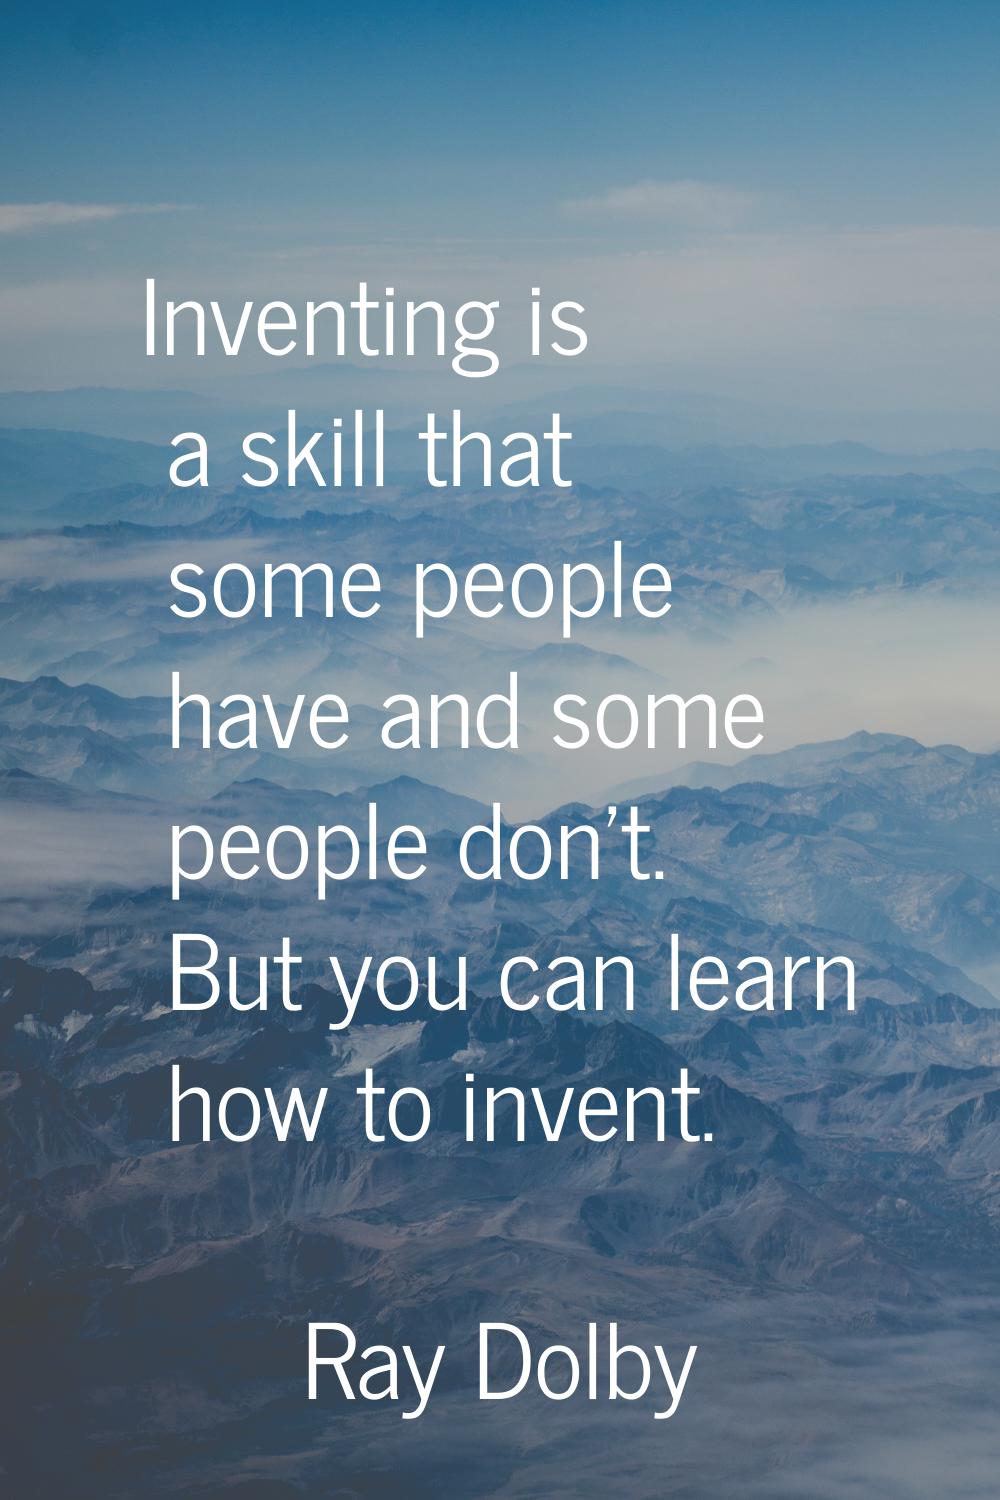 Inventing is a skill that some people have and some people don't. But you can learn how to invent.